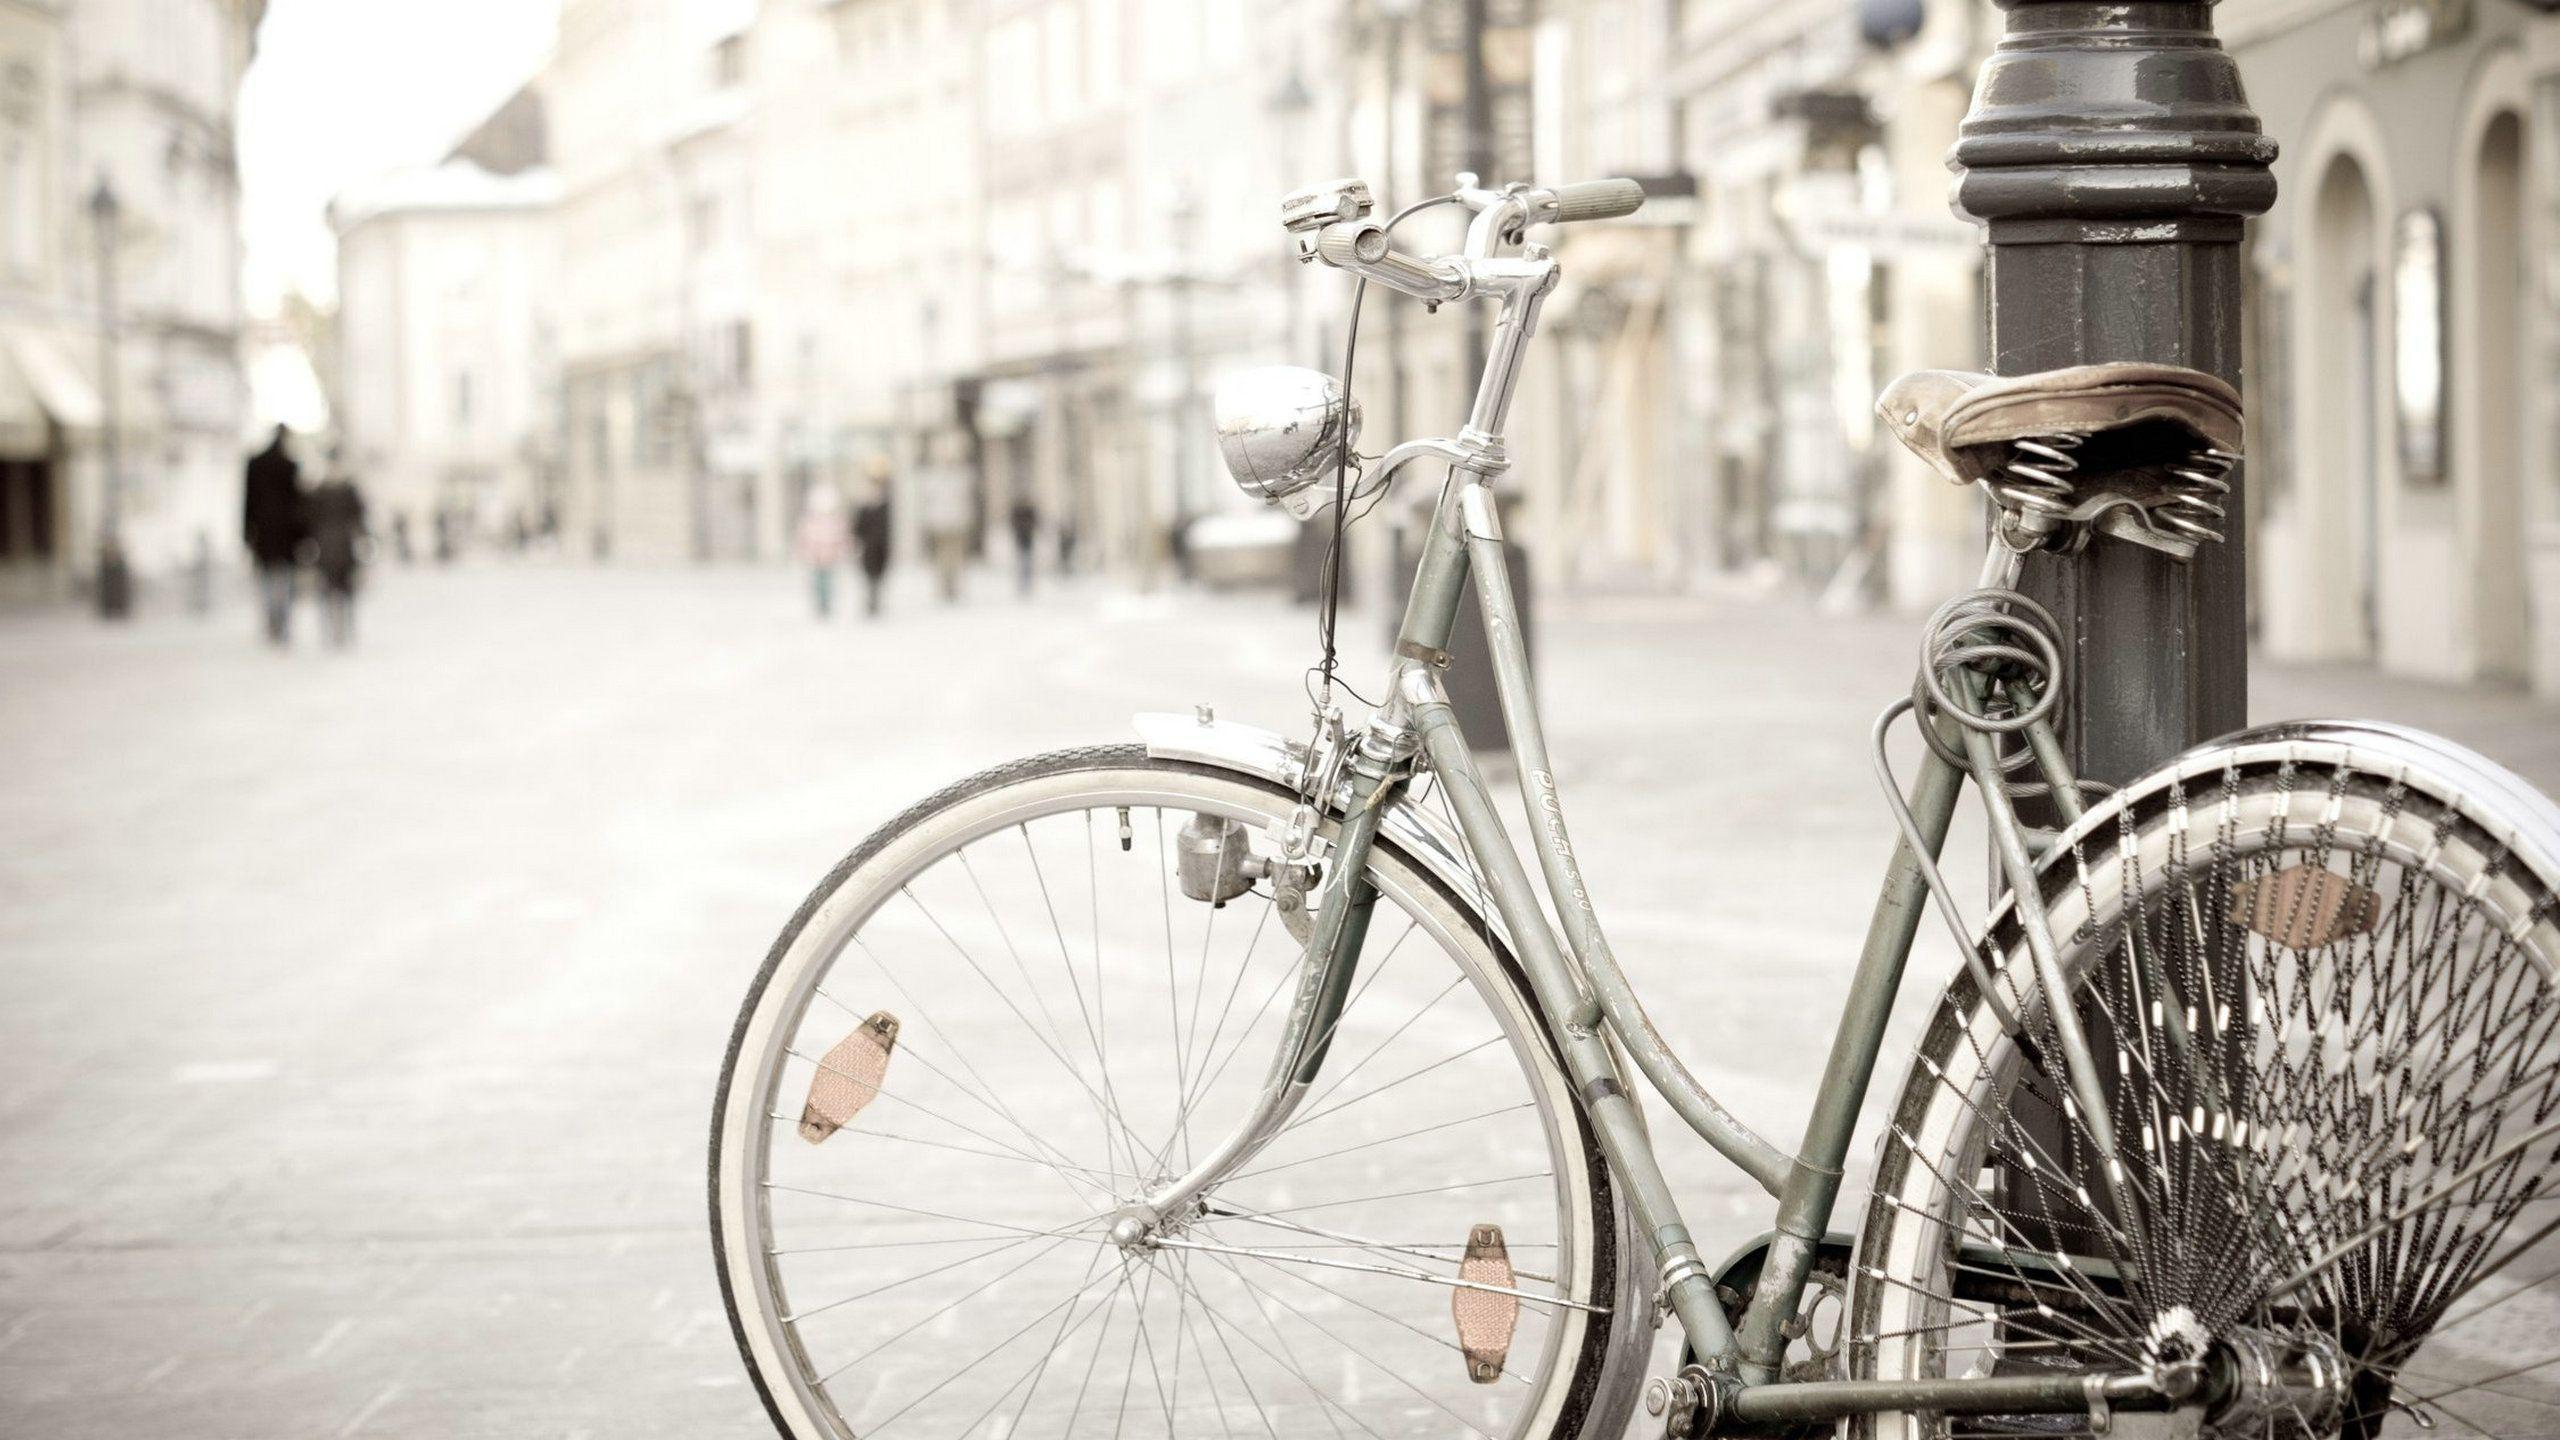 Vehicles For > Vintage Bicycle Wallpaper HD